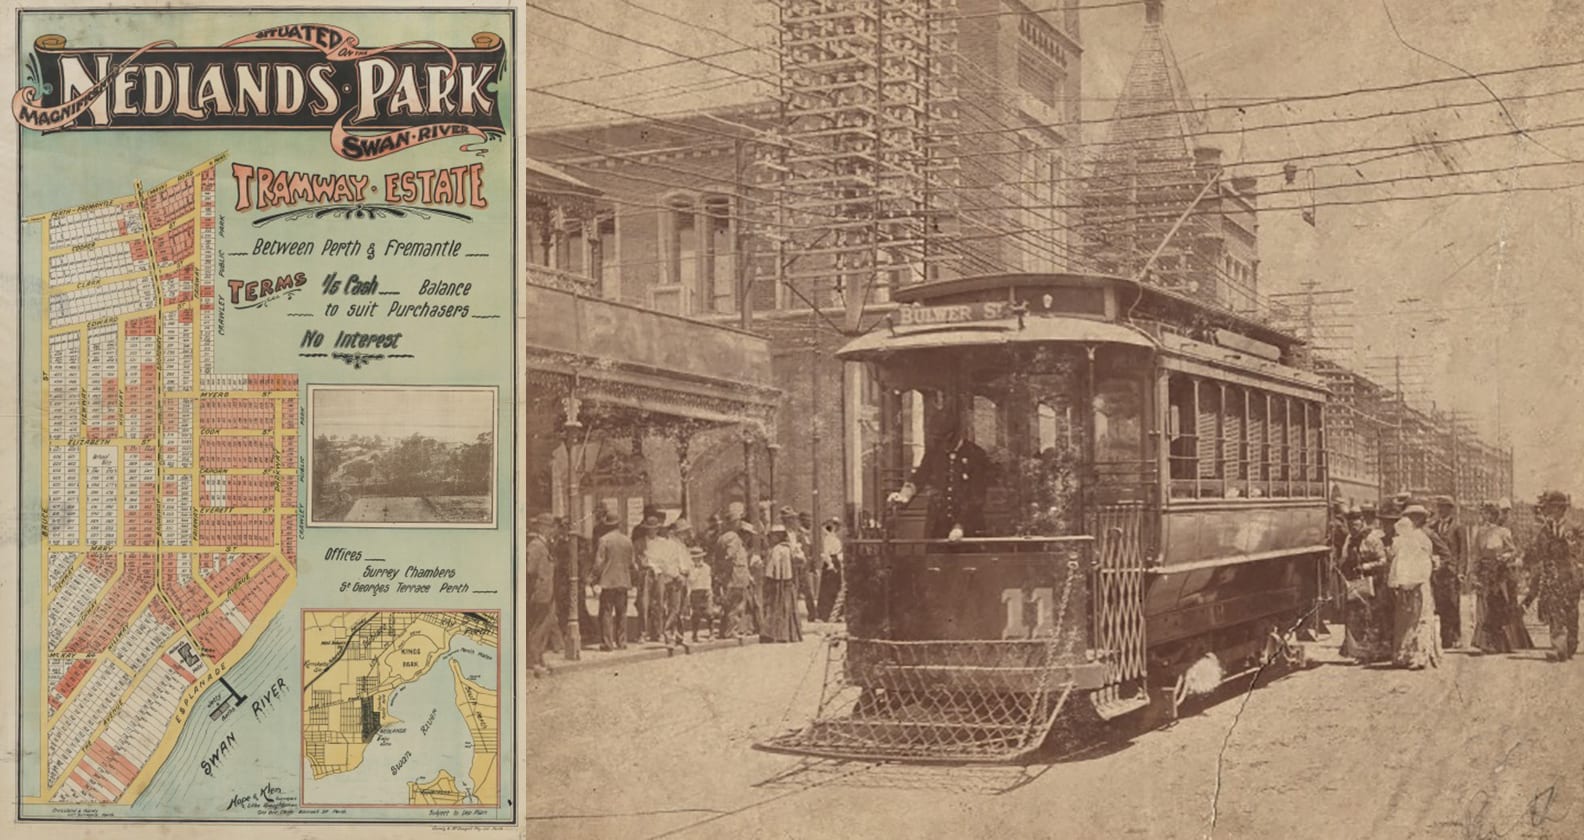 A map of the Nedlands Park Tramway Estate and an old photo of tram in Hay Street